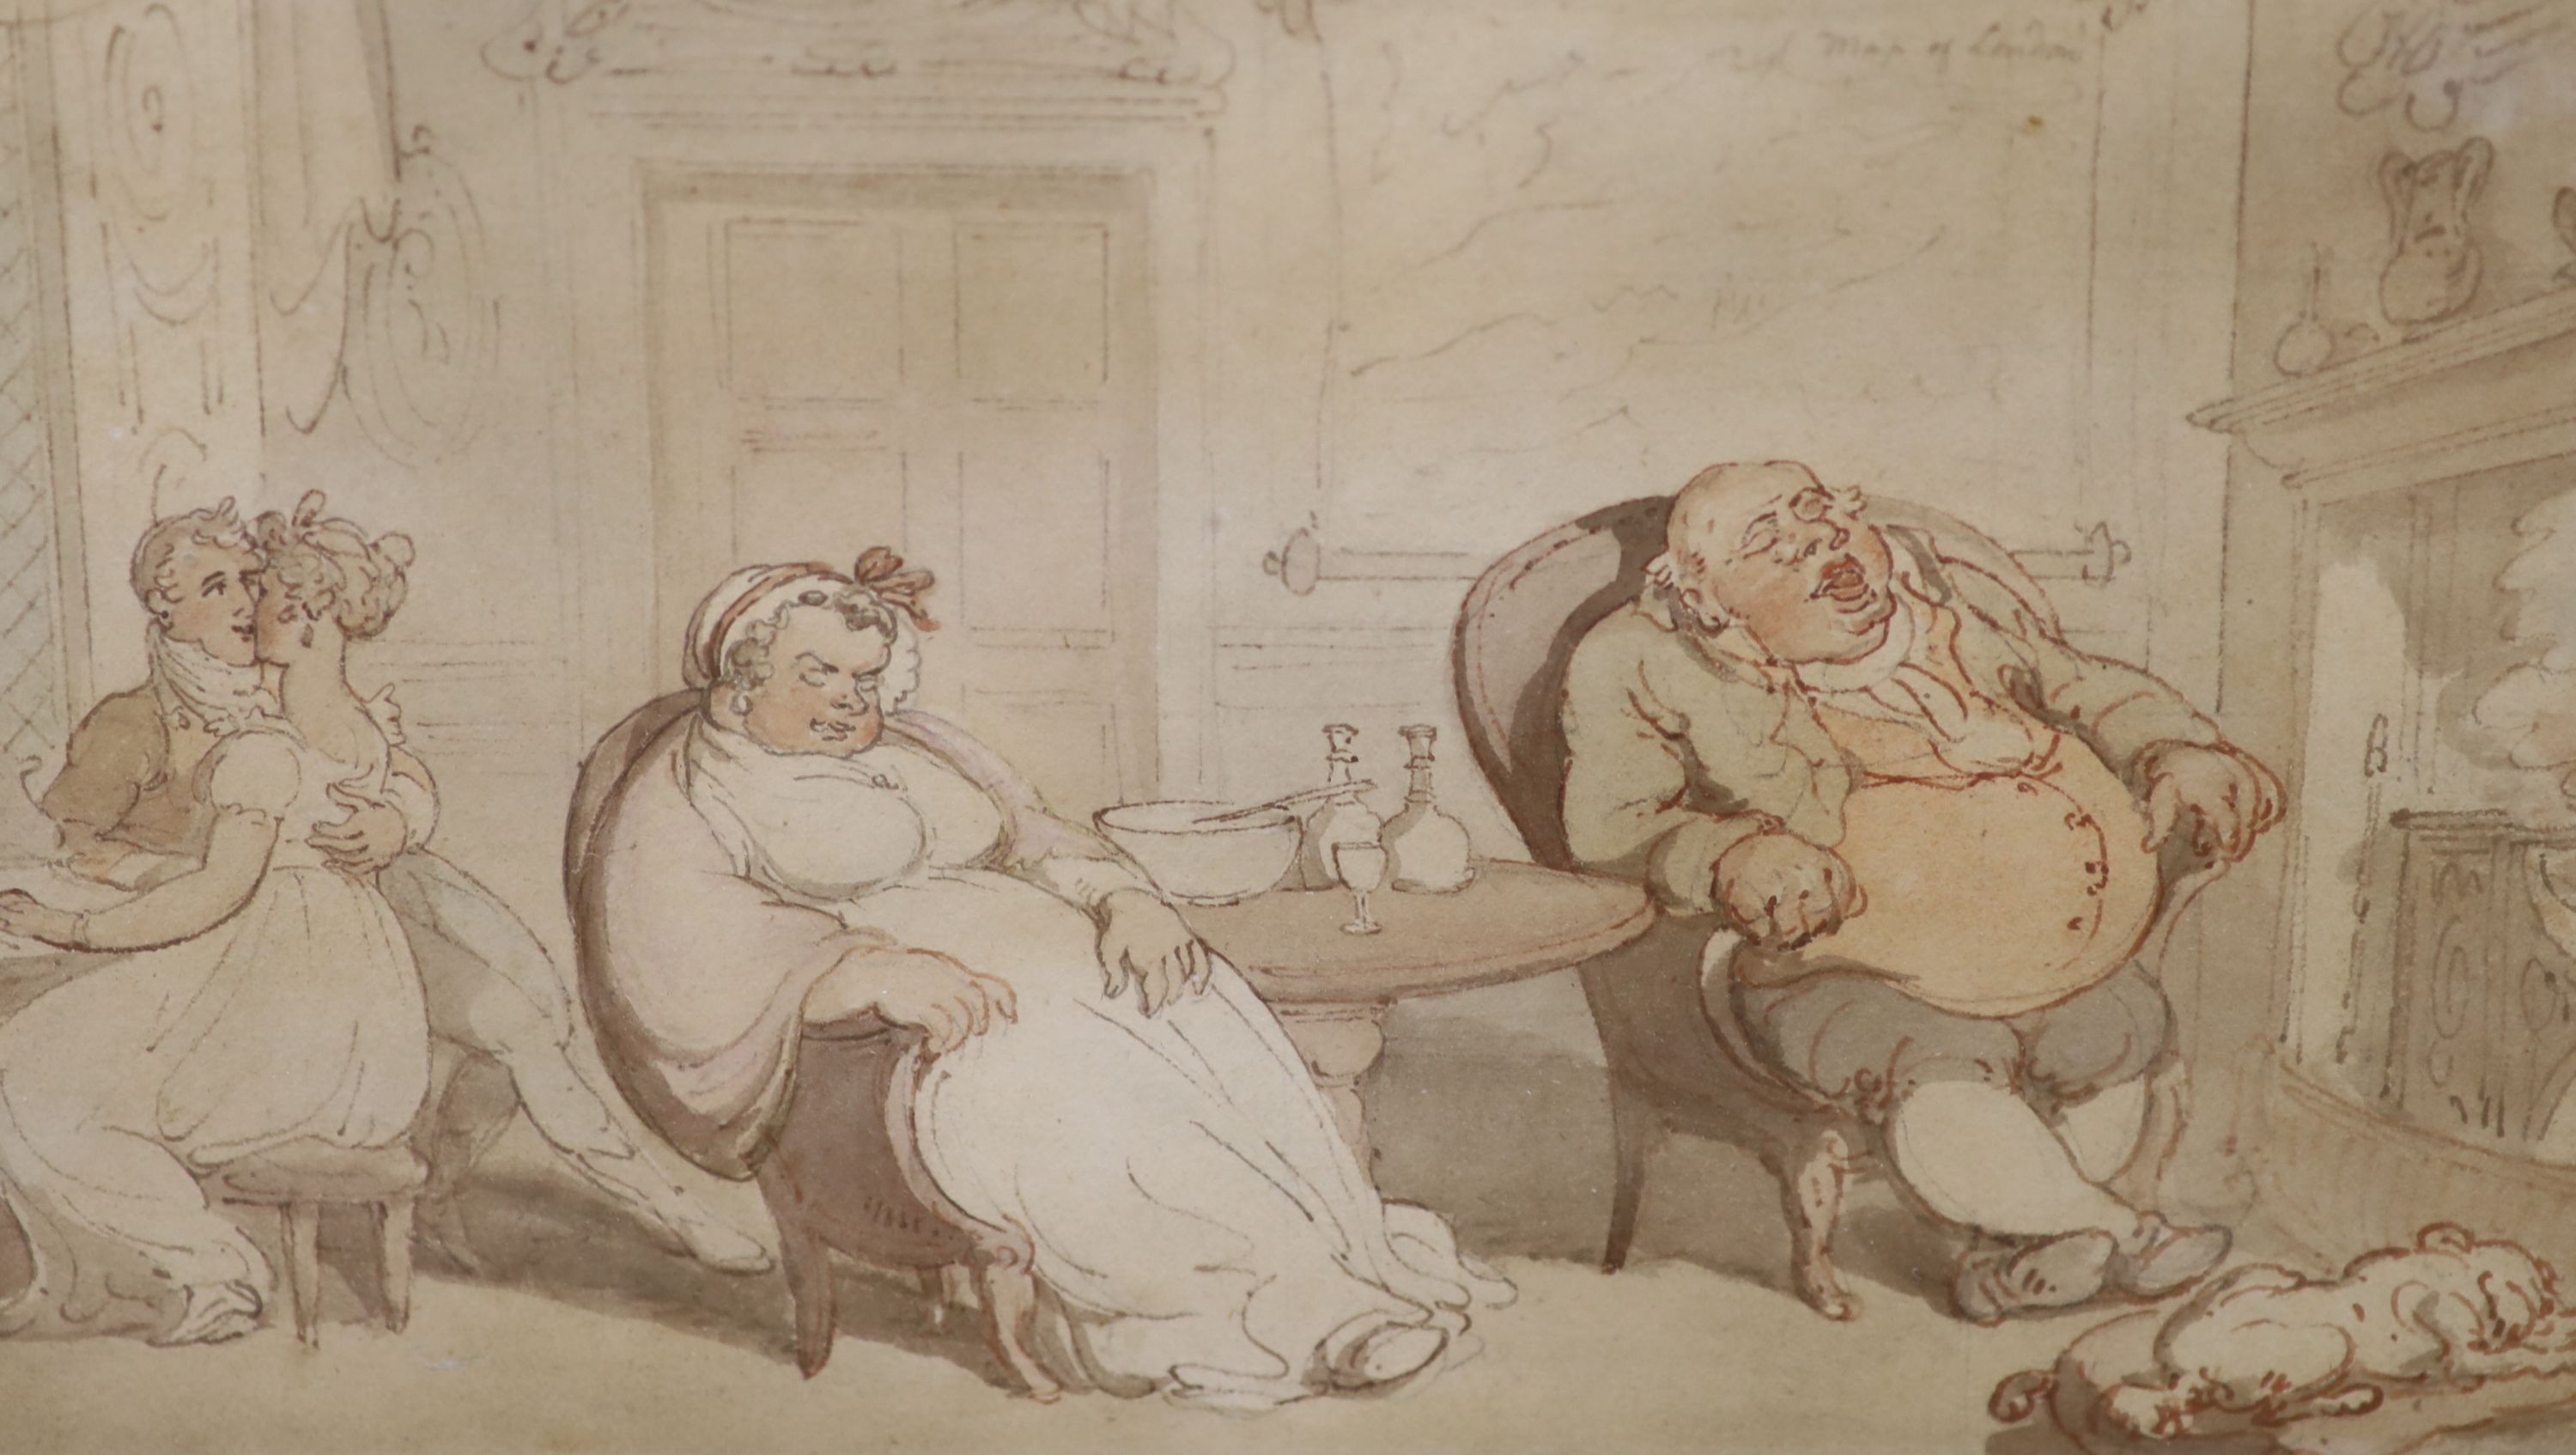 Thomas Rowlandson (1756-1827), ink and watercolour, 'The Music Lesson', Agnews label verso, 14 x